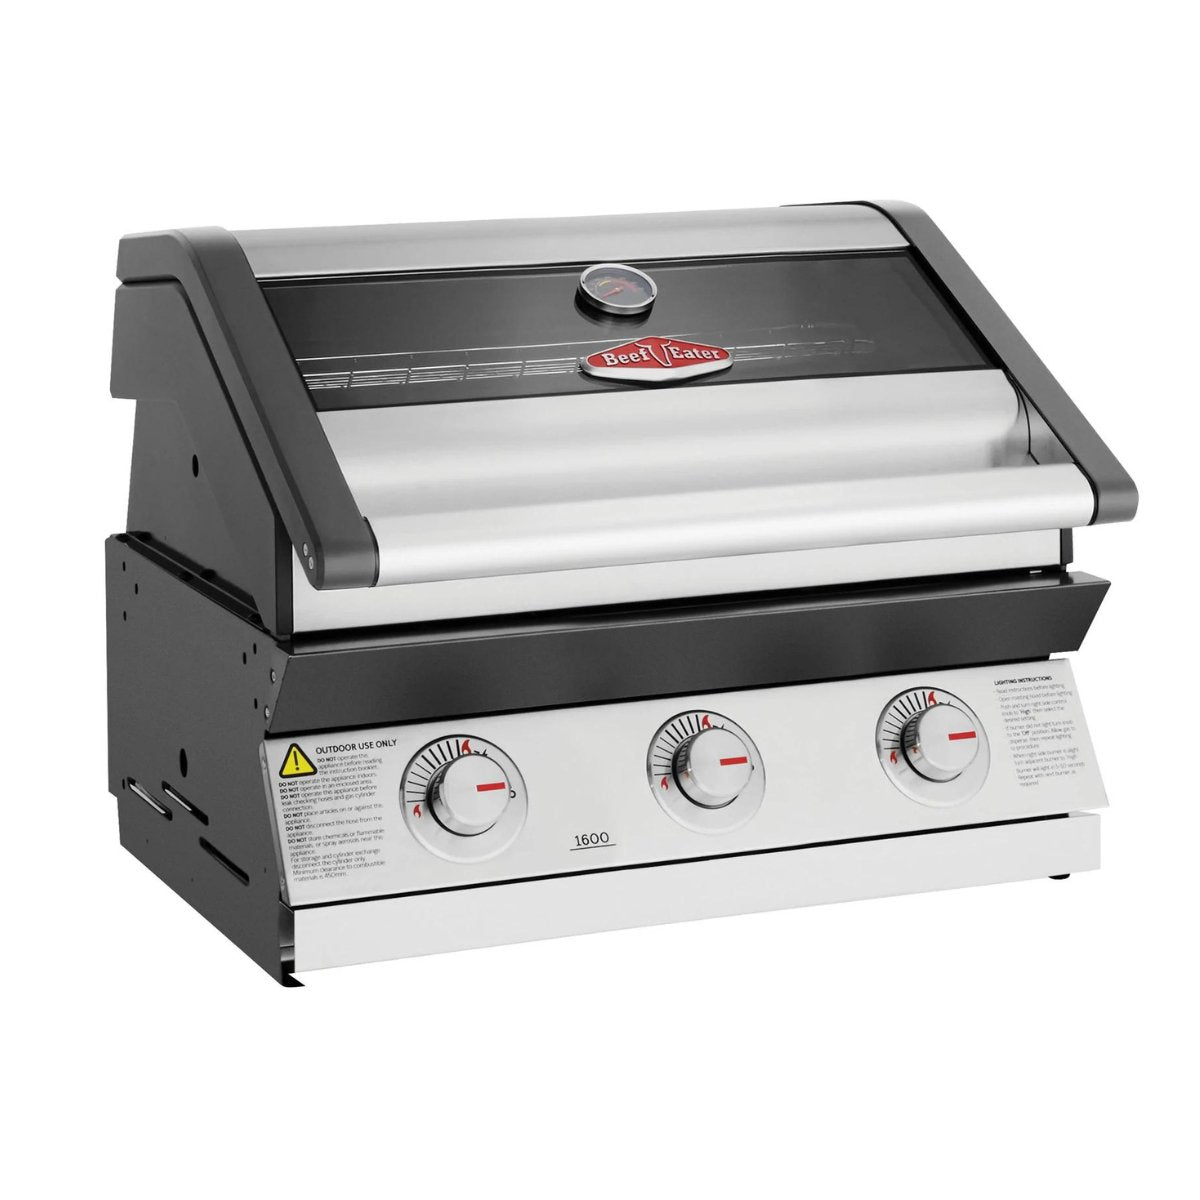 Beefeater 1600S 3 Burner Built-In Grill - Kitchen In The Garden